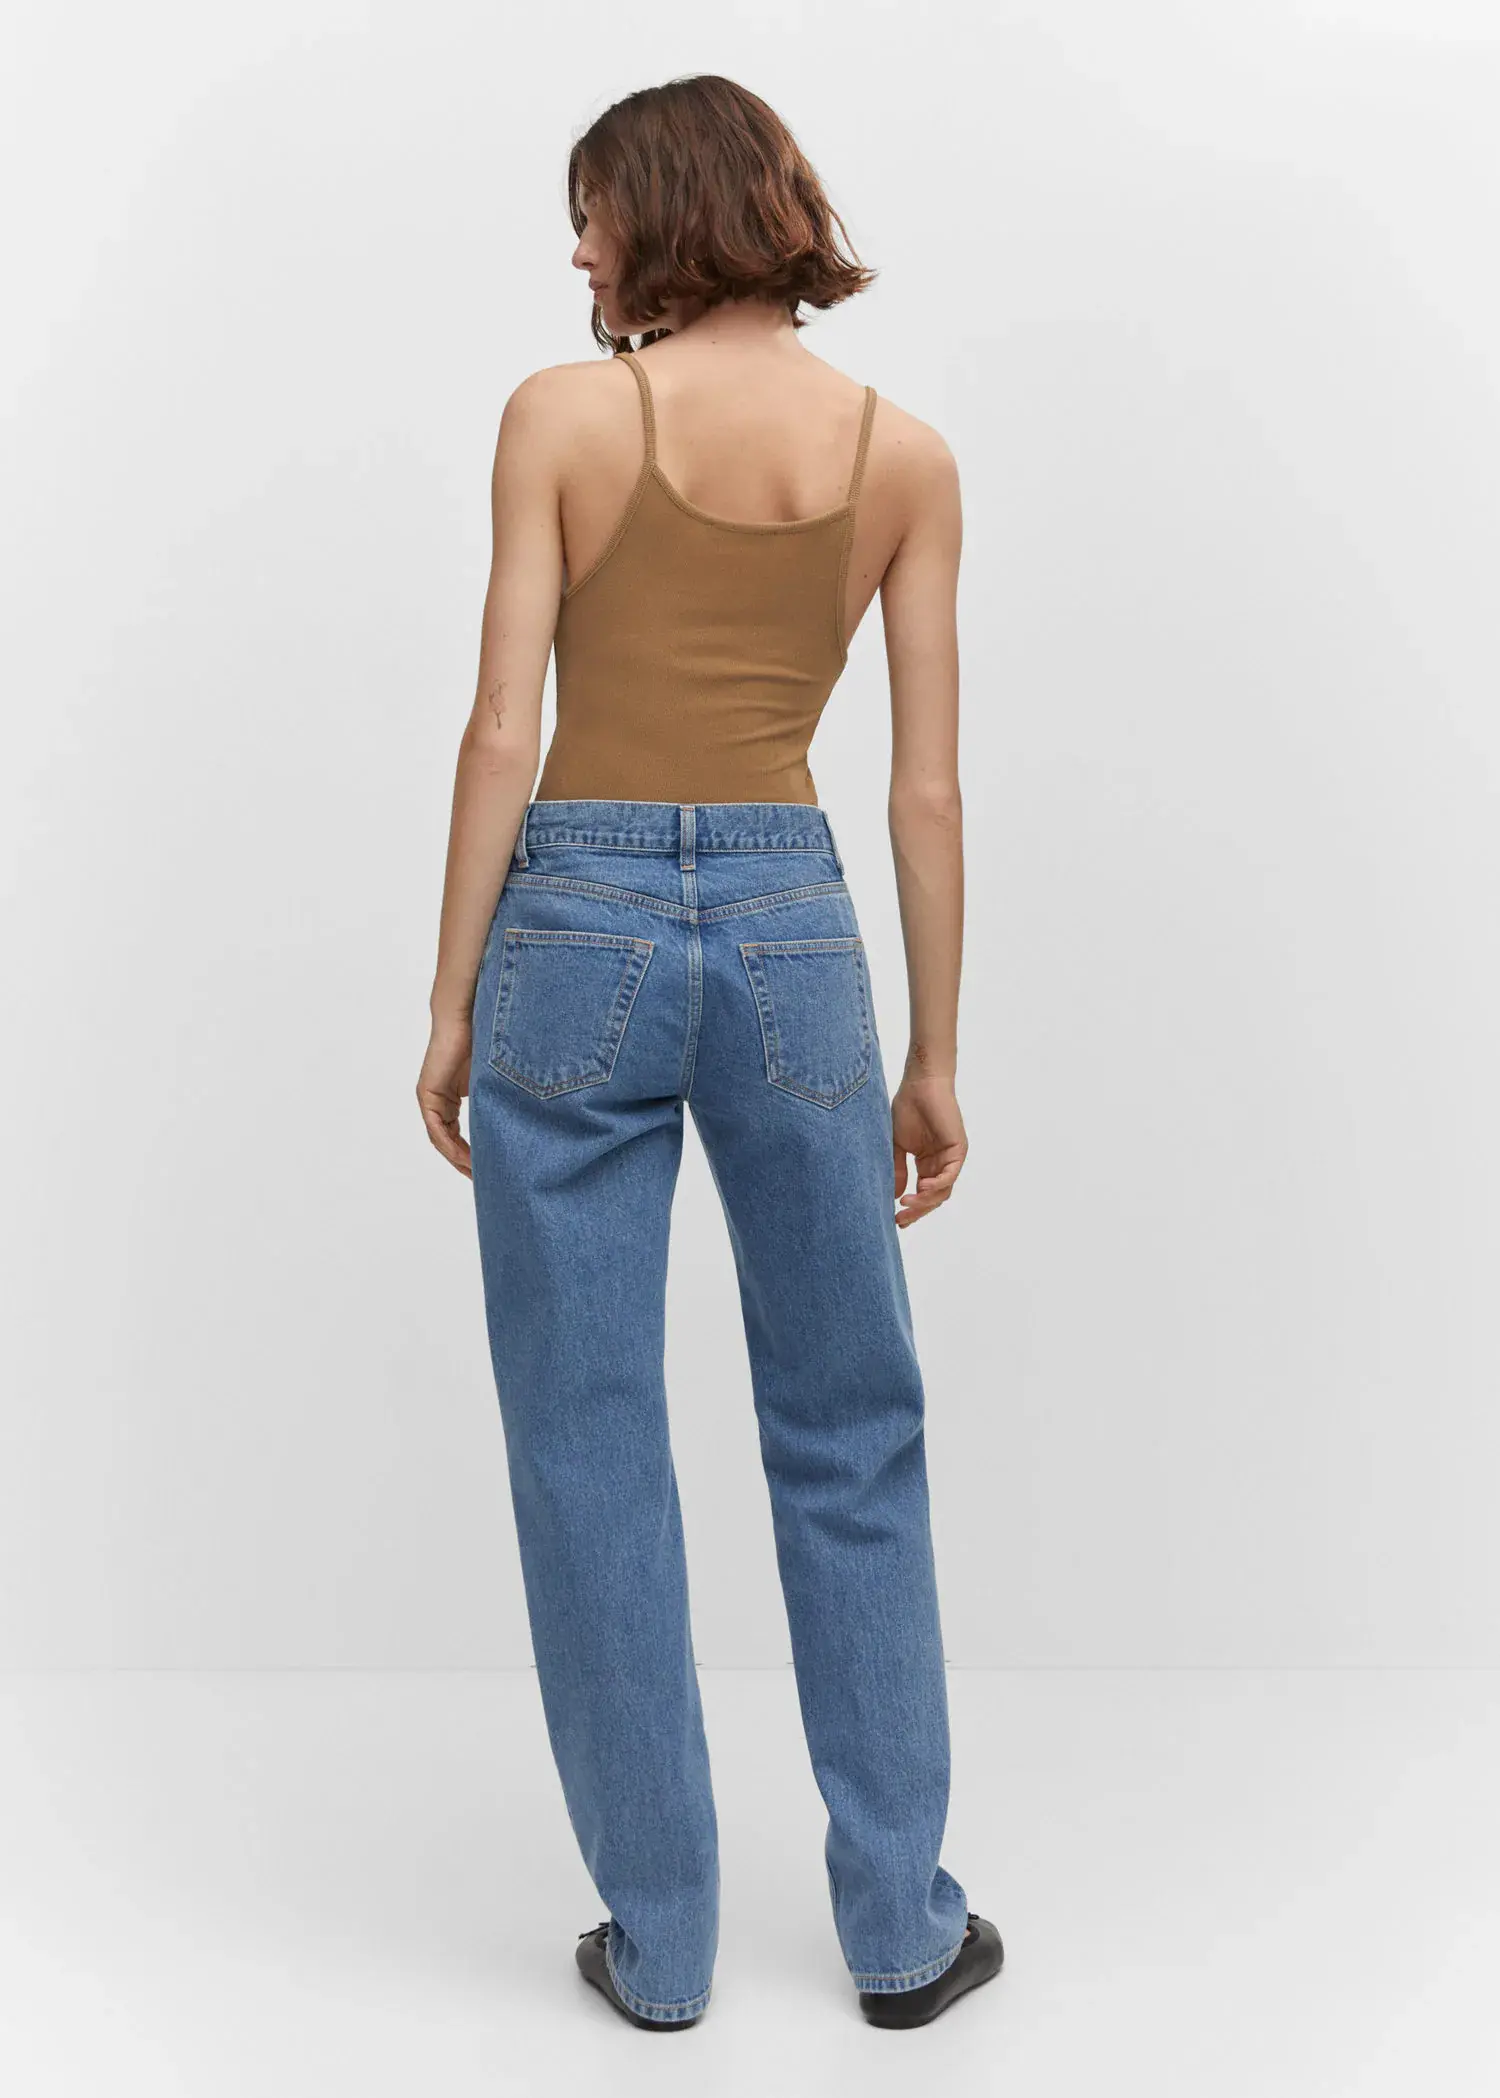 Mango Mid-rise straight jeans. a woman wearing a brown tank top and blue jeans. 